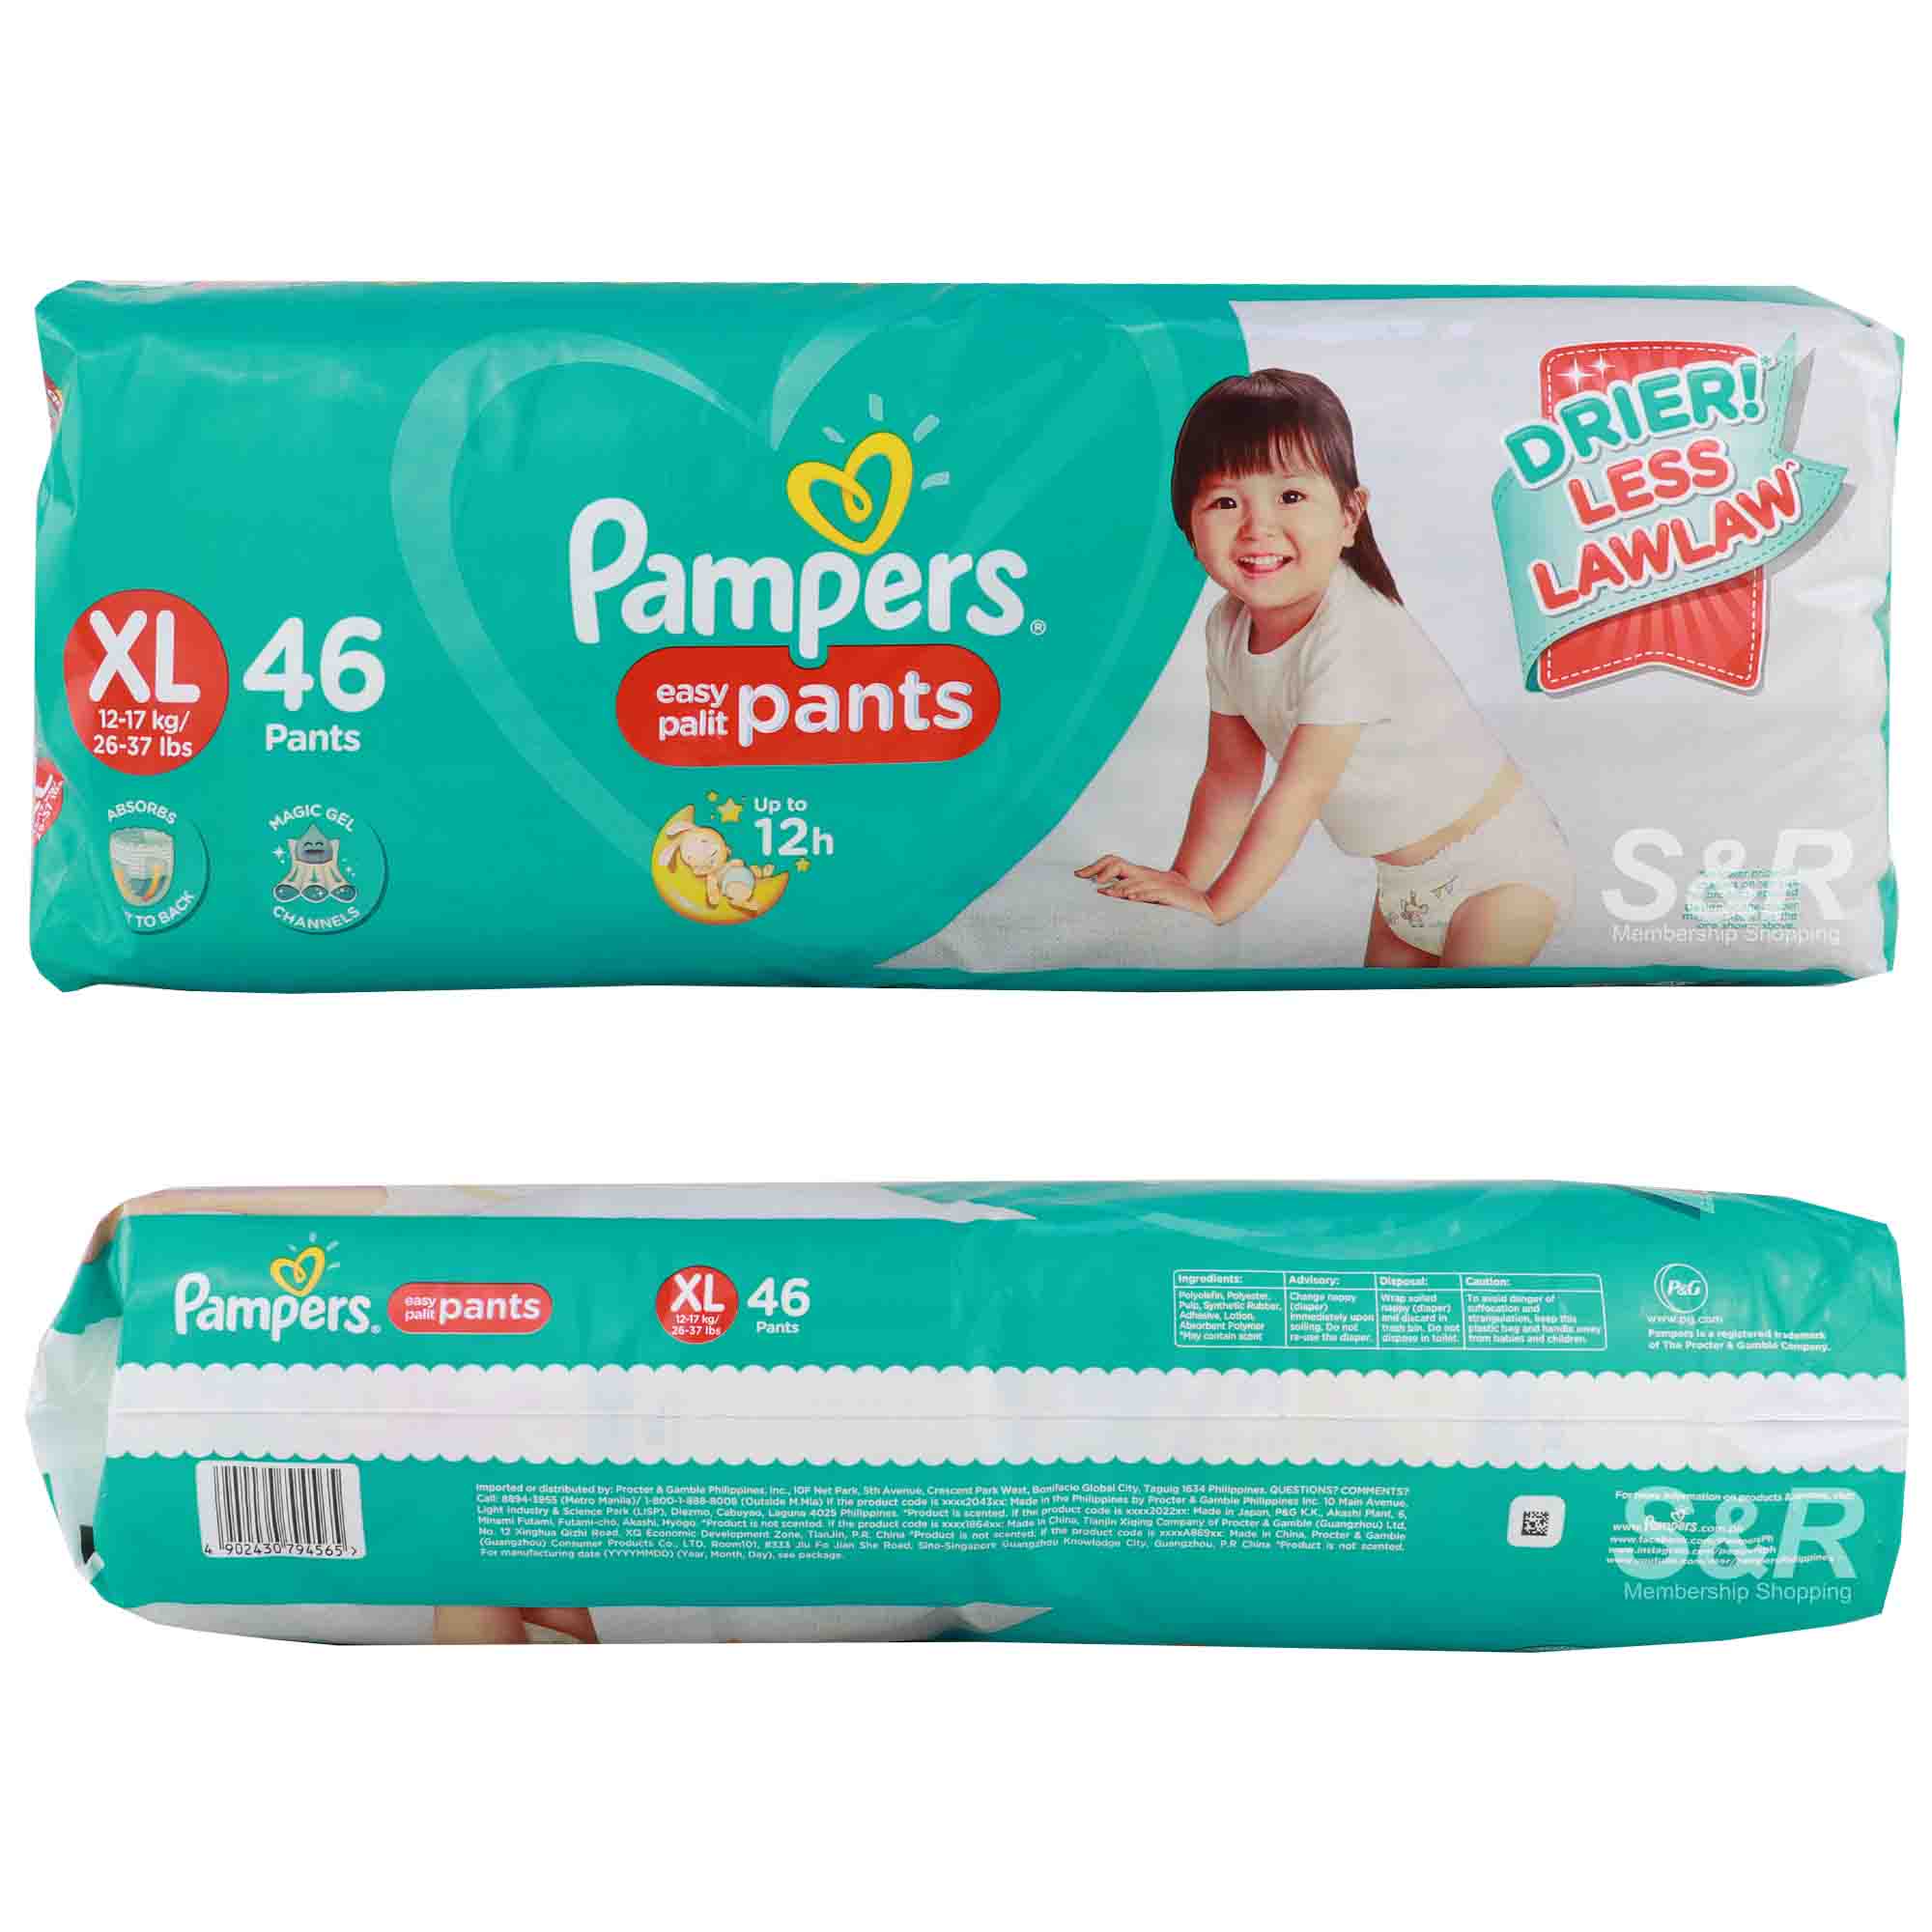 Pampers Happy Skin Pants, XL Size, 36 Count (Jumbo Pack) – Sabkooch.com